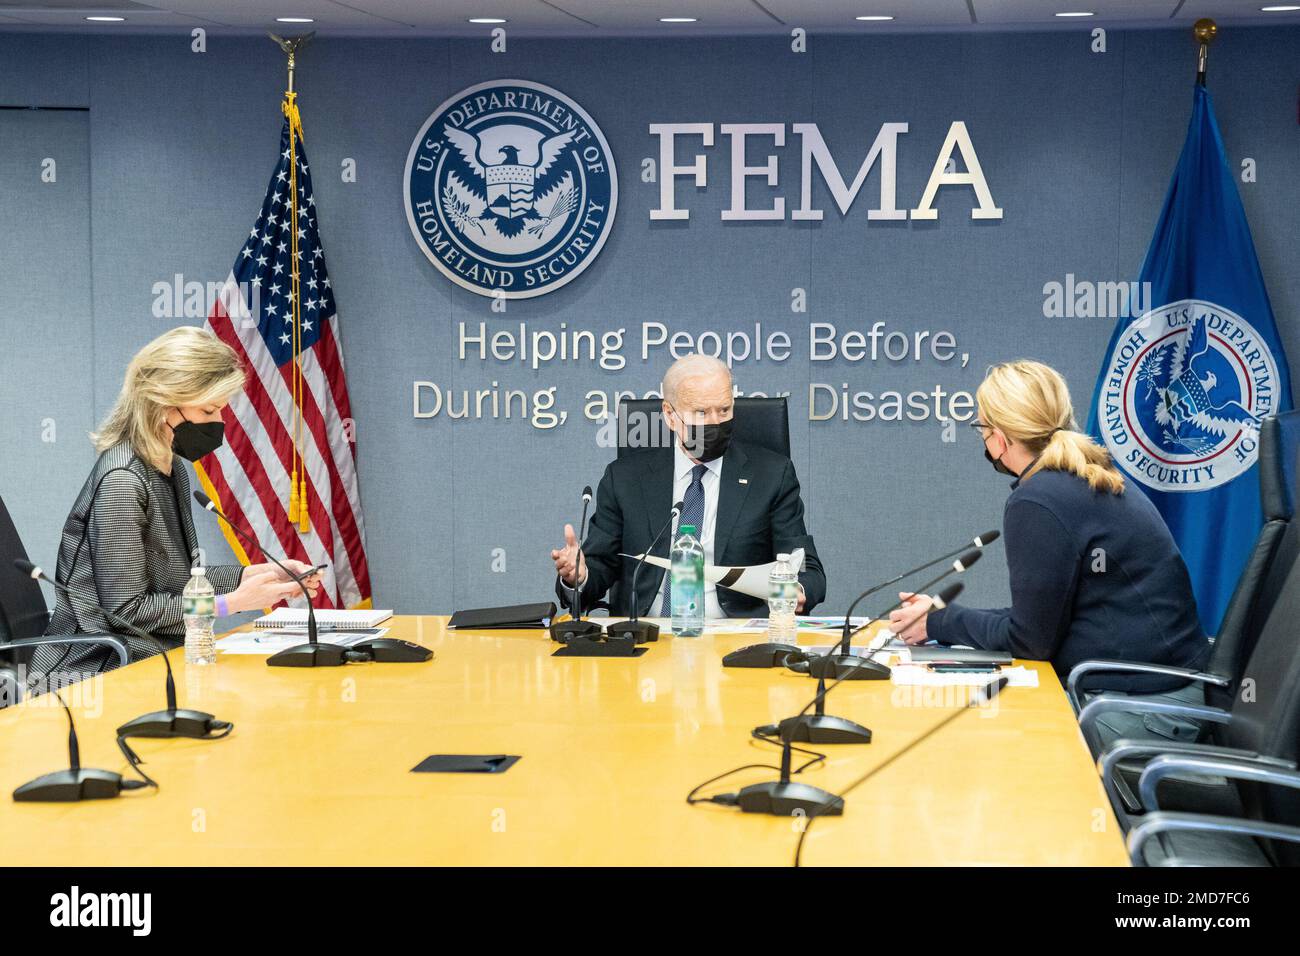 Reportage: President Joe Biden, joined by Federal Emergency Management Agency (FEMA) Administrator Deanne Criswell, right, and Deputy National Security Adviser Liz Sherwood-Randall, receives an update briefing on Hurricane Ida, Sunday, Aug. 29, 2021, at the FEMA Headquarters Stock Photo